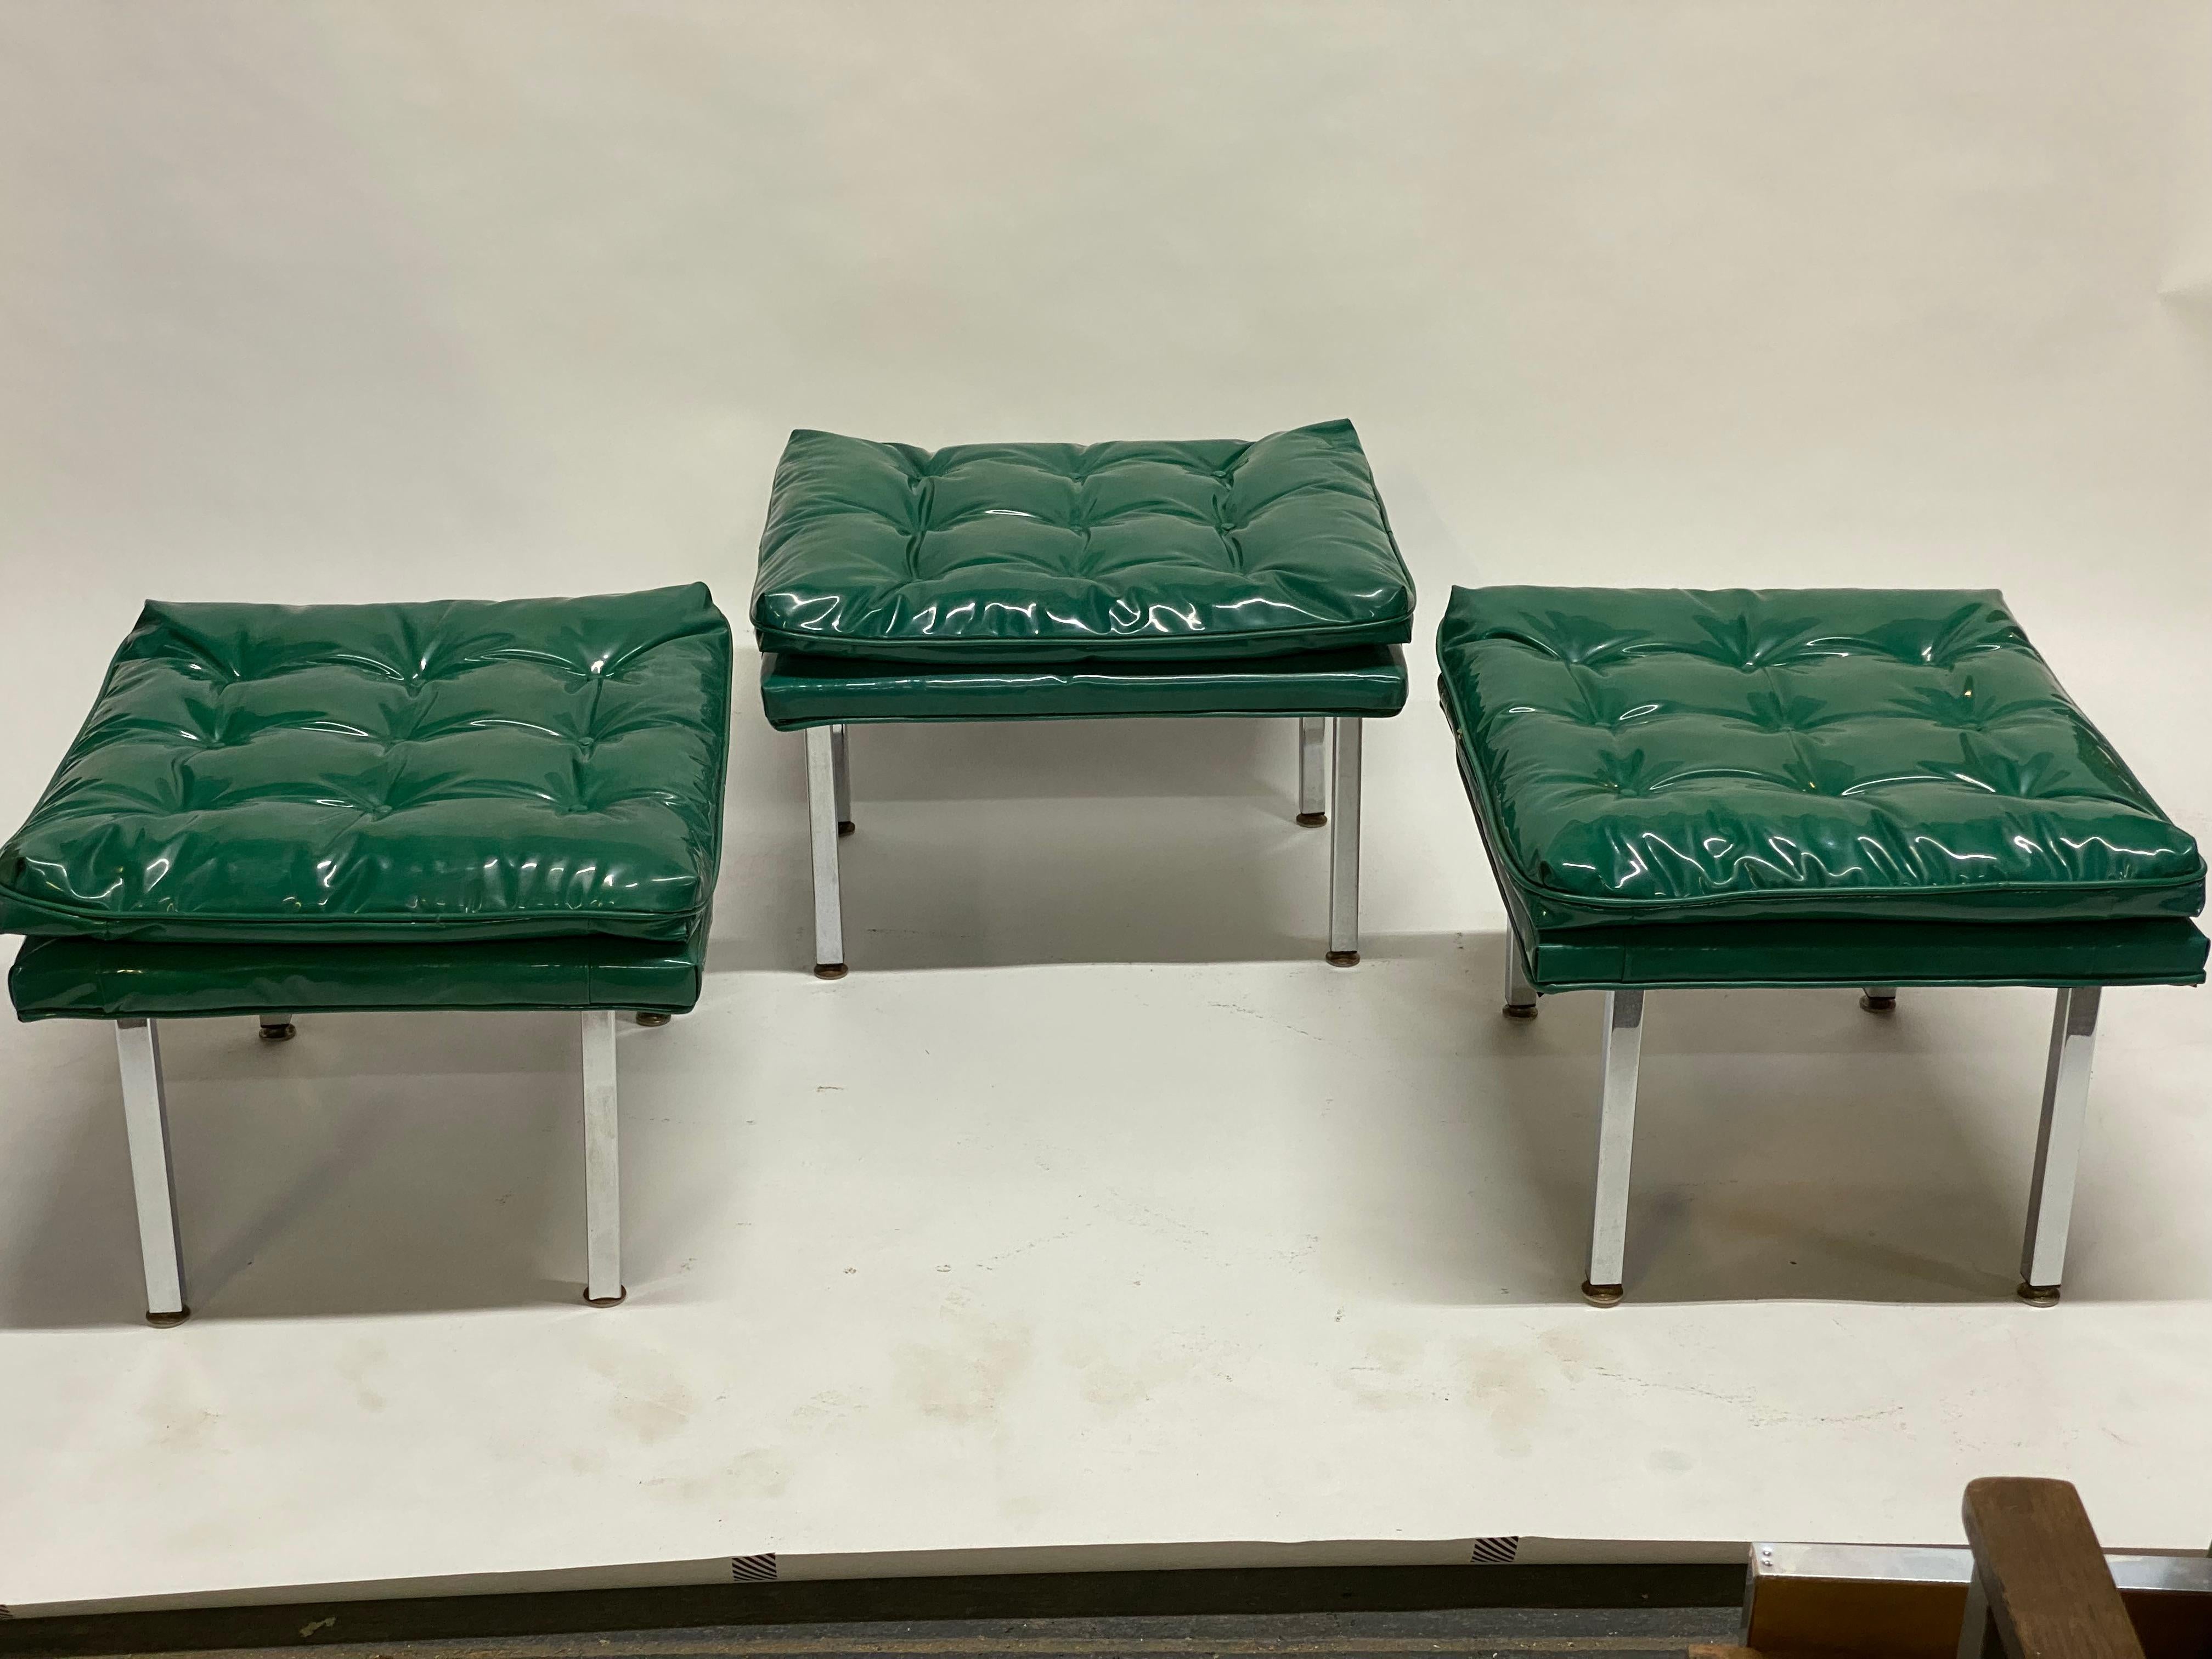 Late 20th Century Mid-Century Modern Glossy Tufted Kelly Green Upholstered Stools, Set of Three